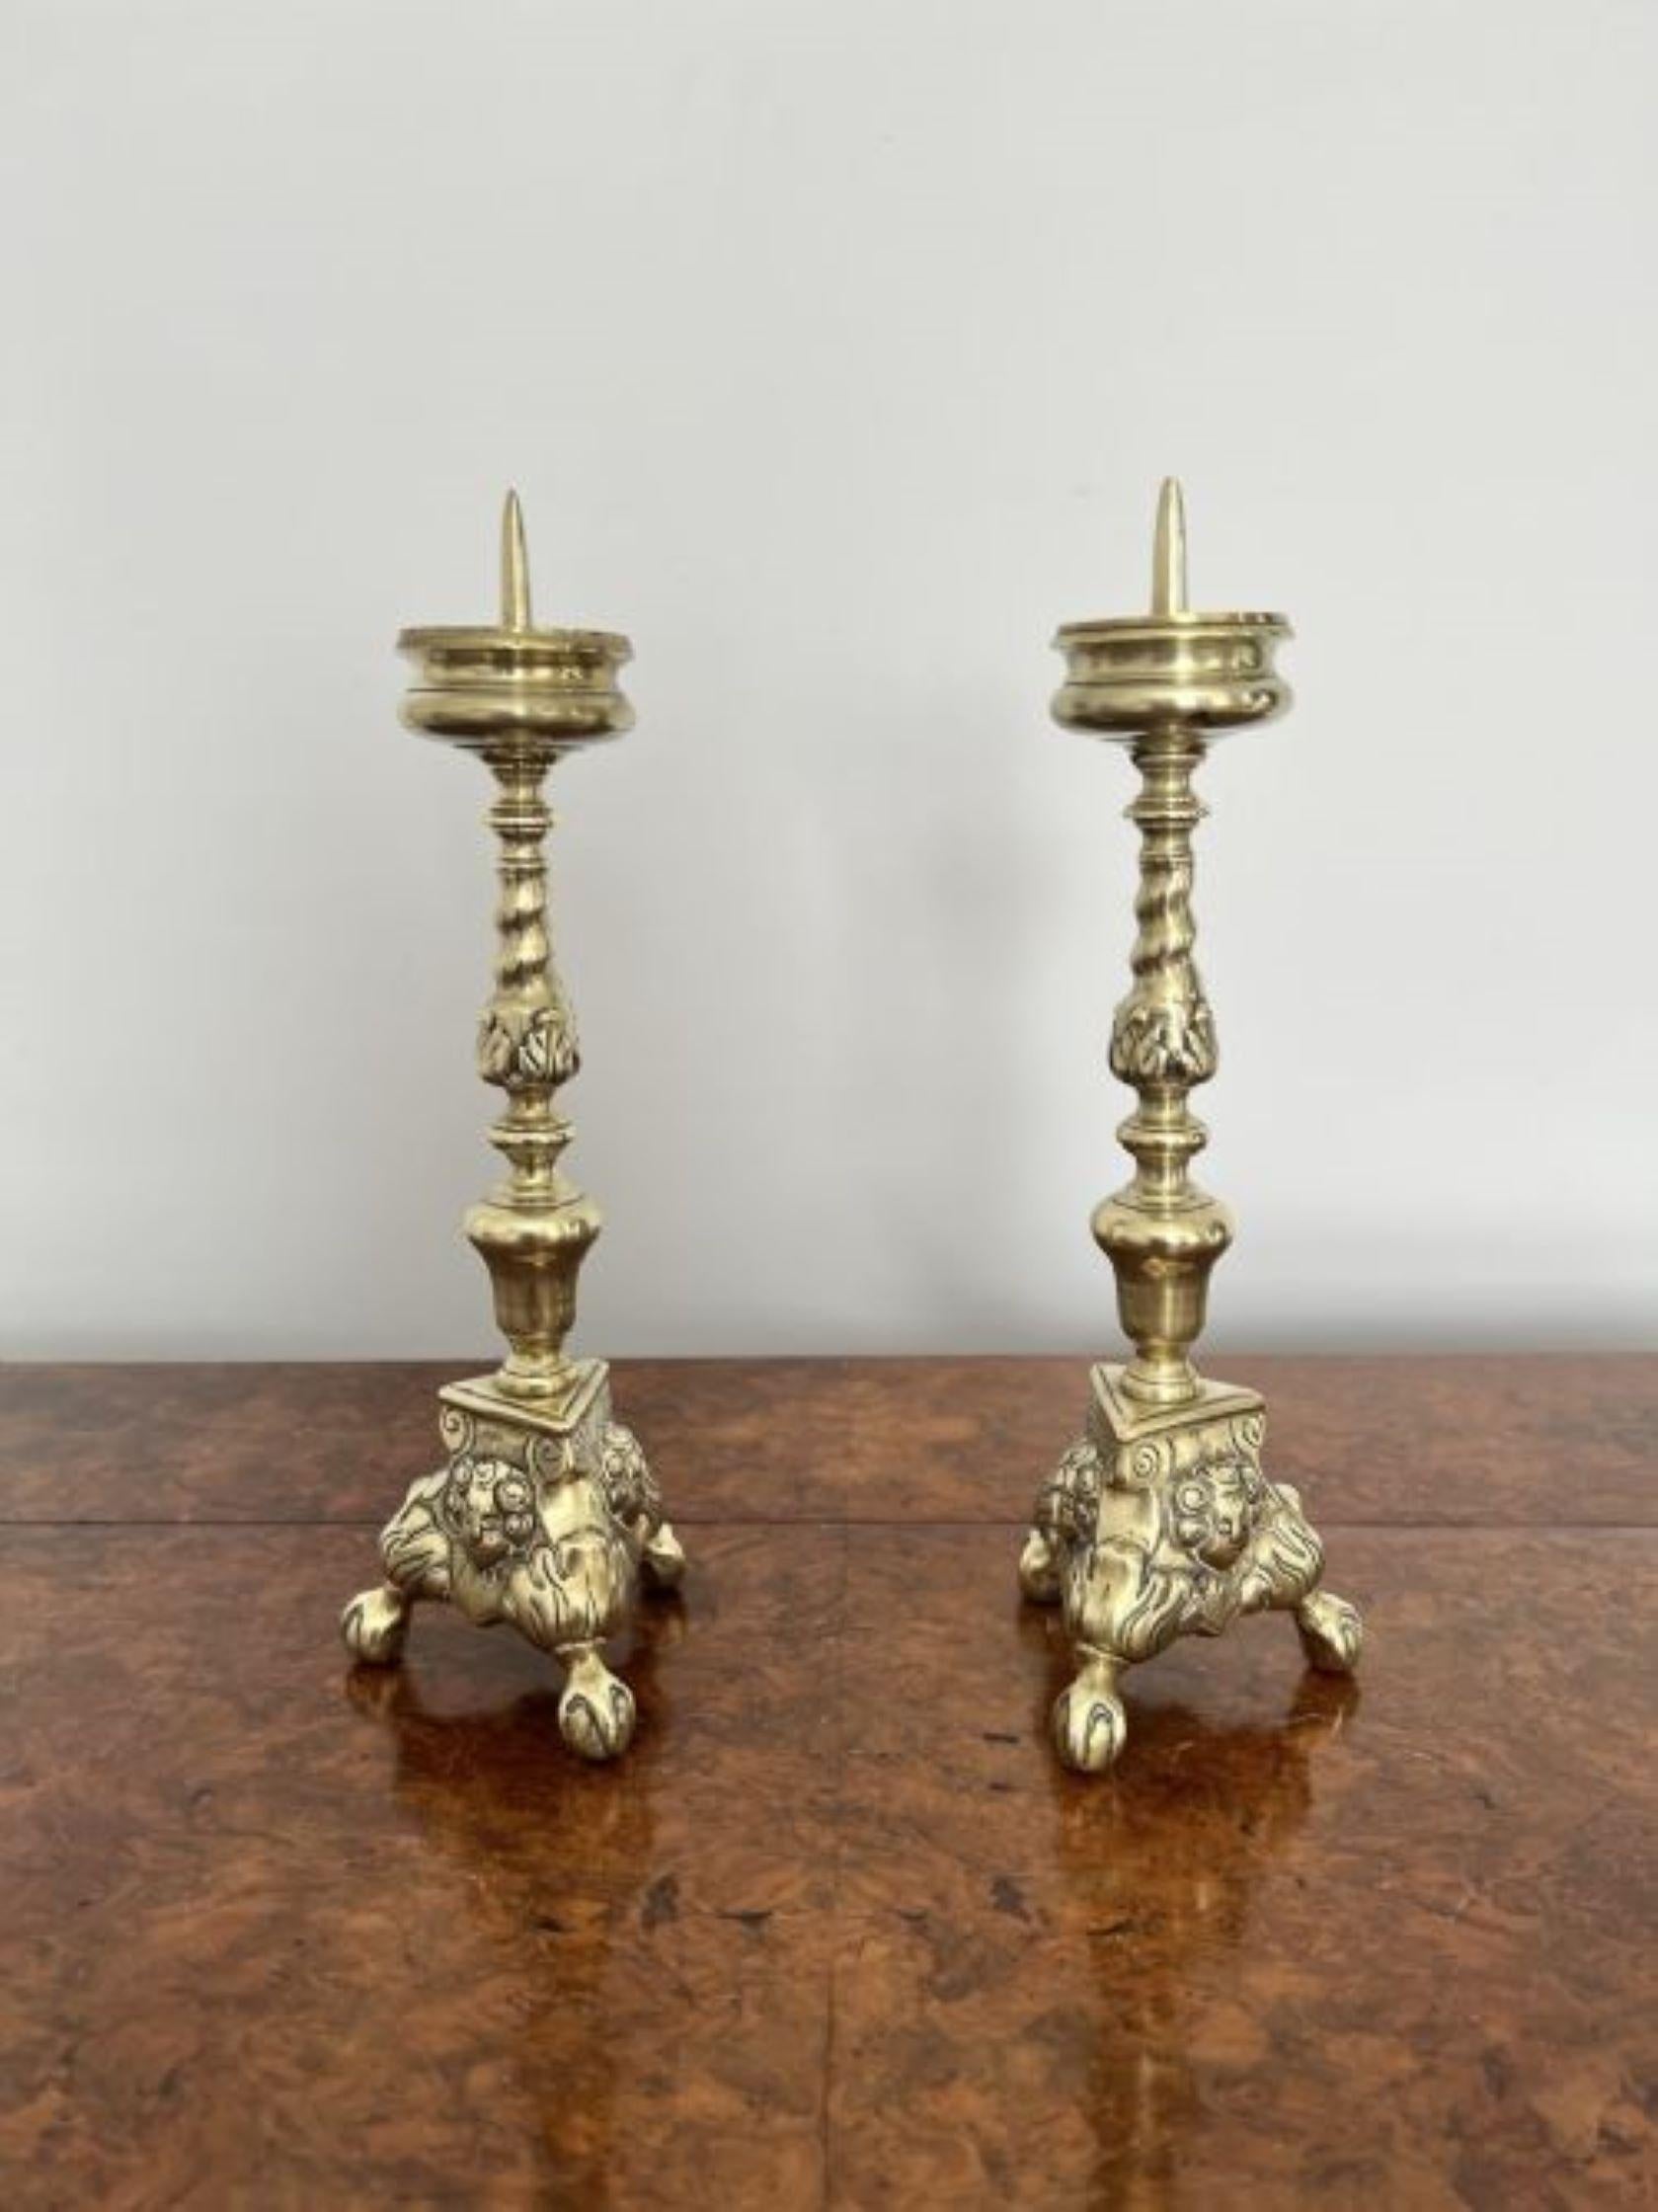 Quality Pair of Unusual Antique Victorian Ornate Brass Pricket Candlestick In Good Condition For Sale In Ipswich, GB